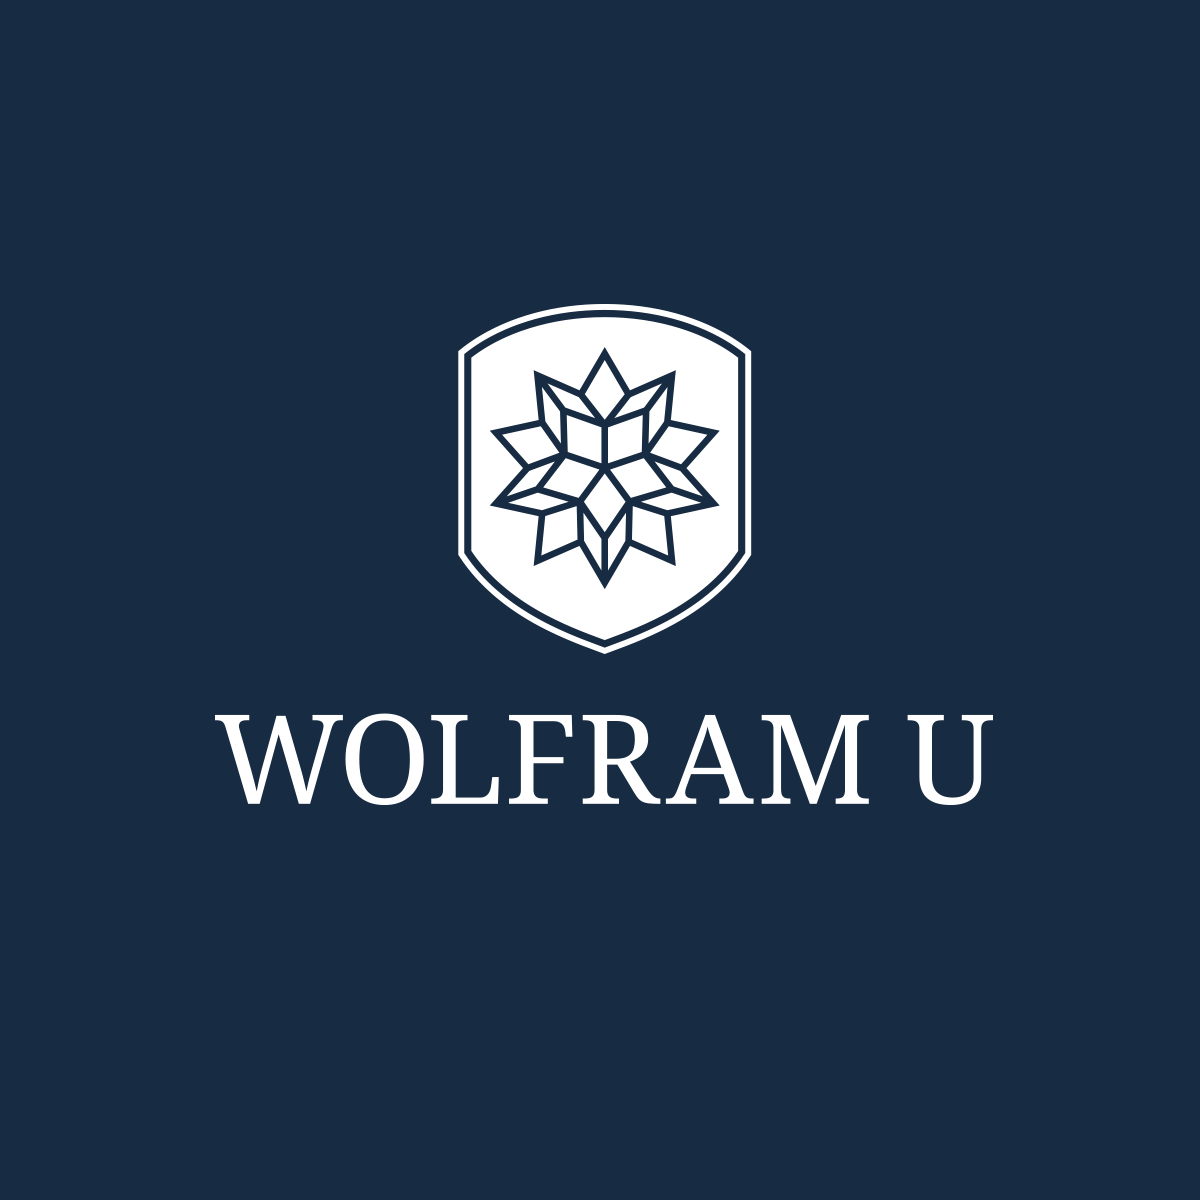 Full Interactive Course for Introduction to the Wolfram Language ...